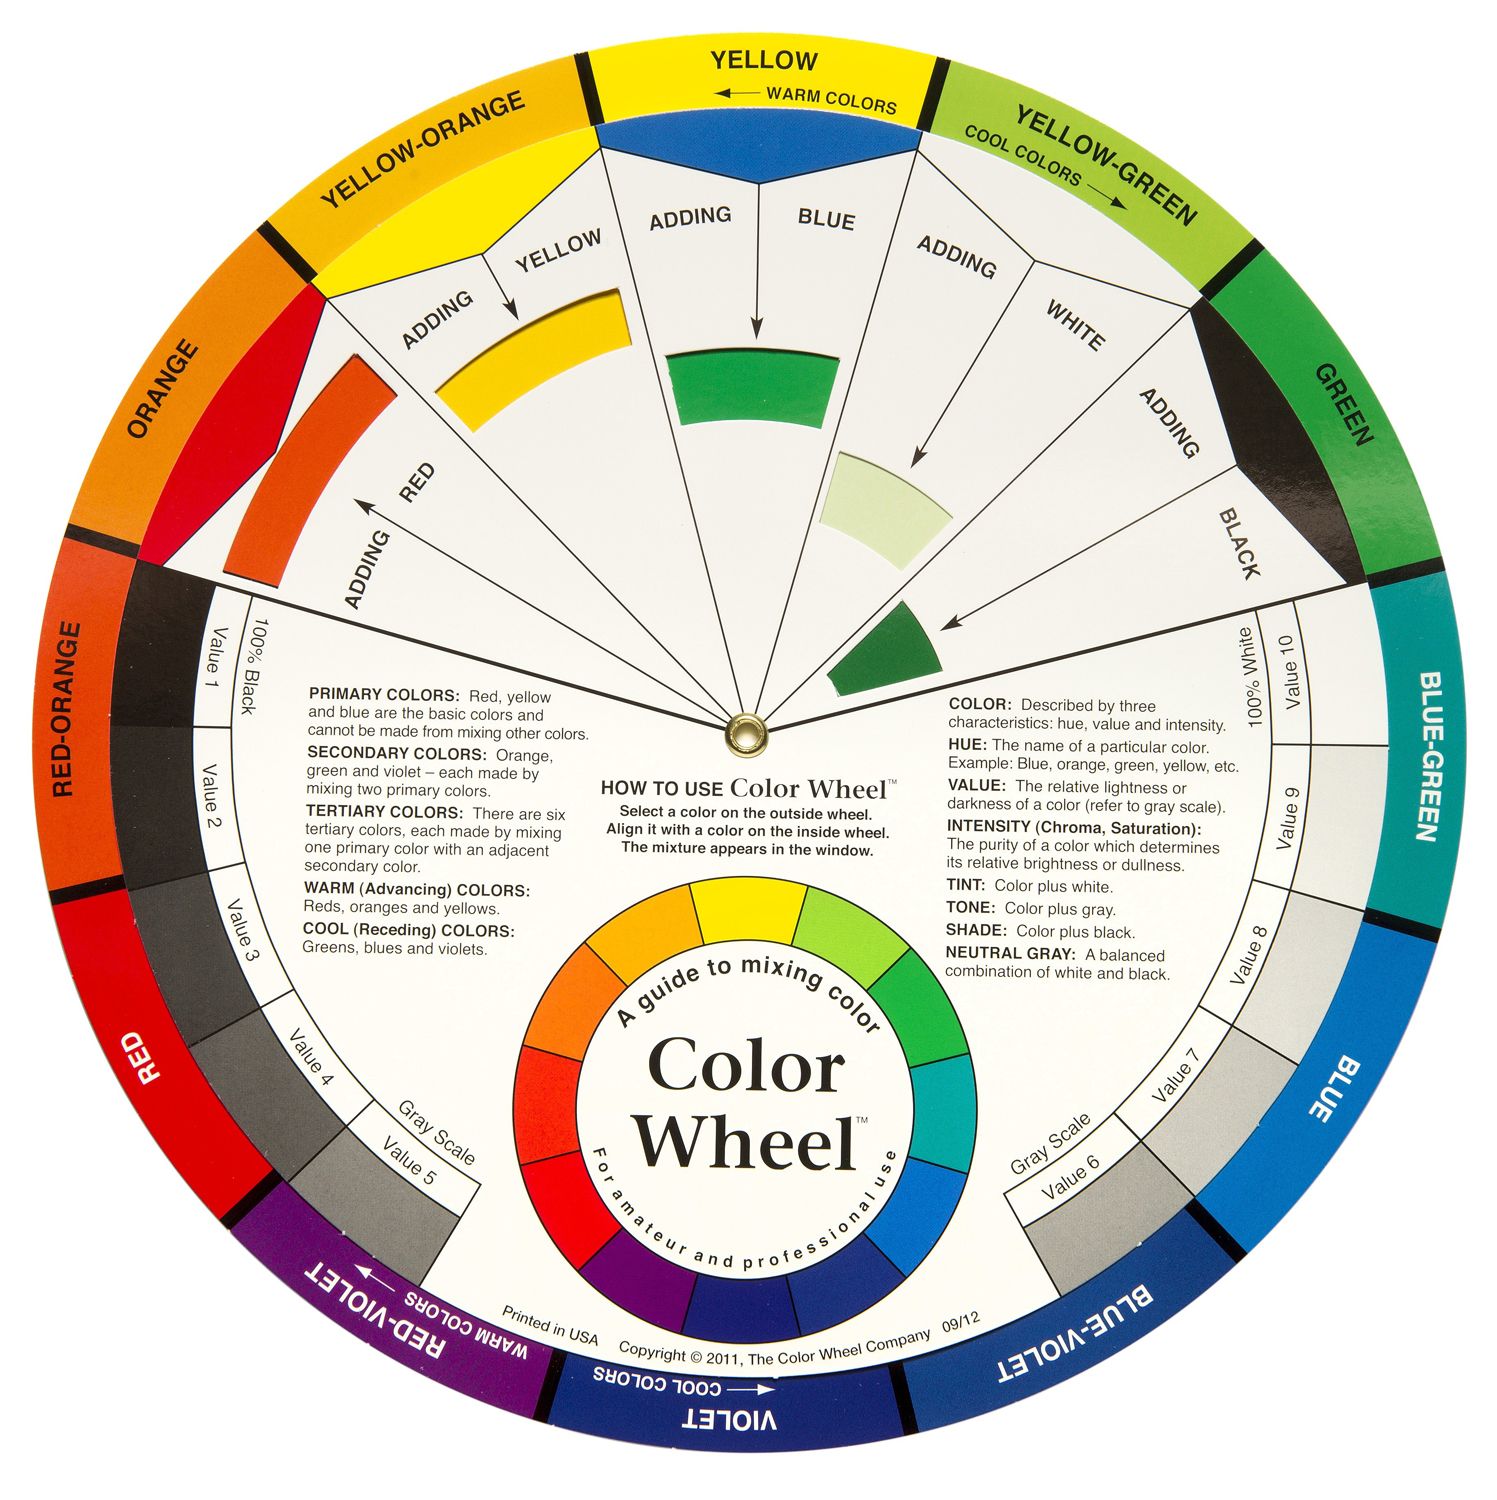 Artist's Colour Wheel Mixing Guide